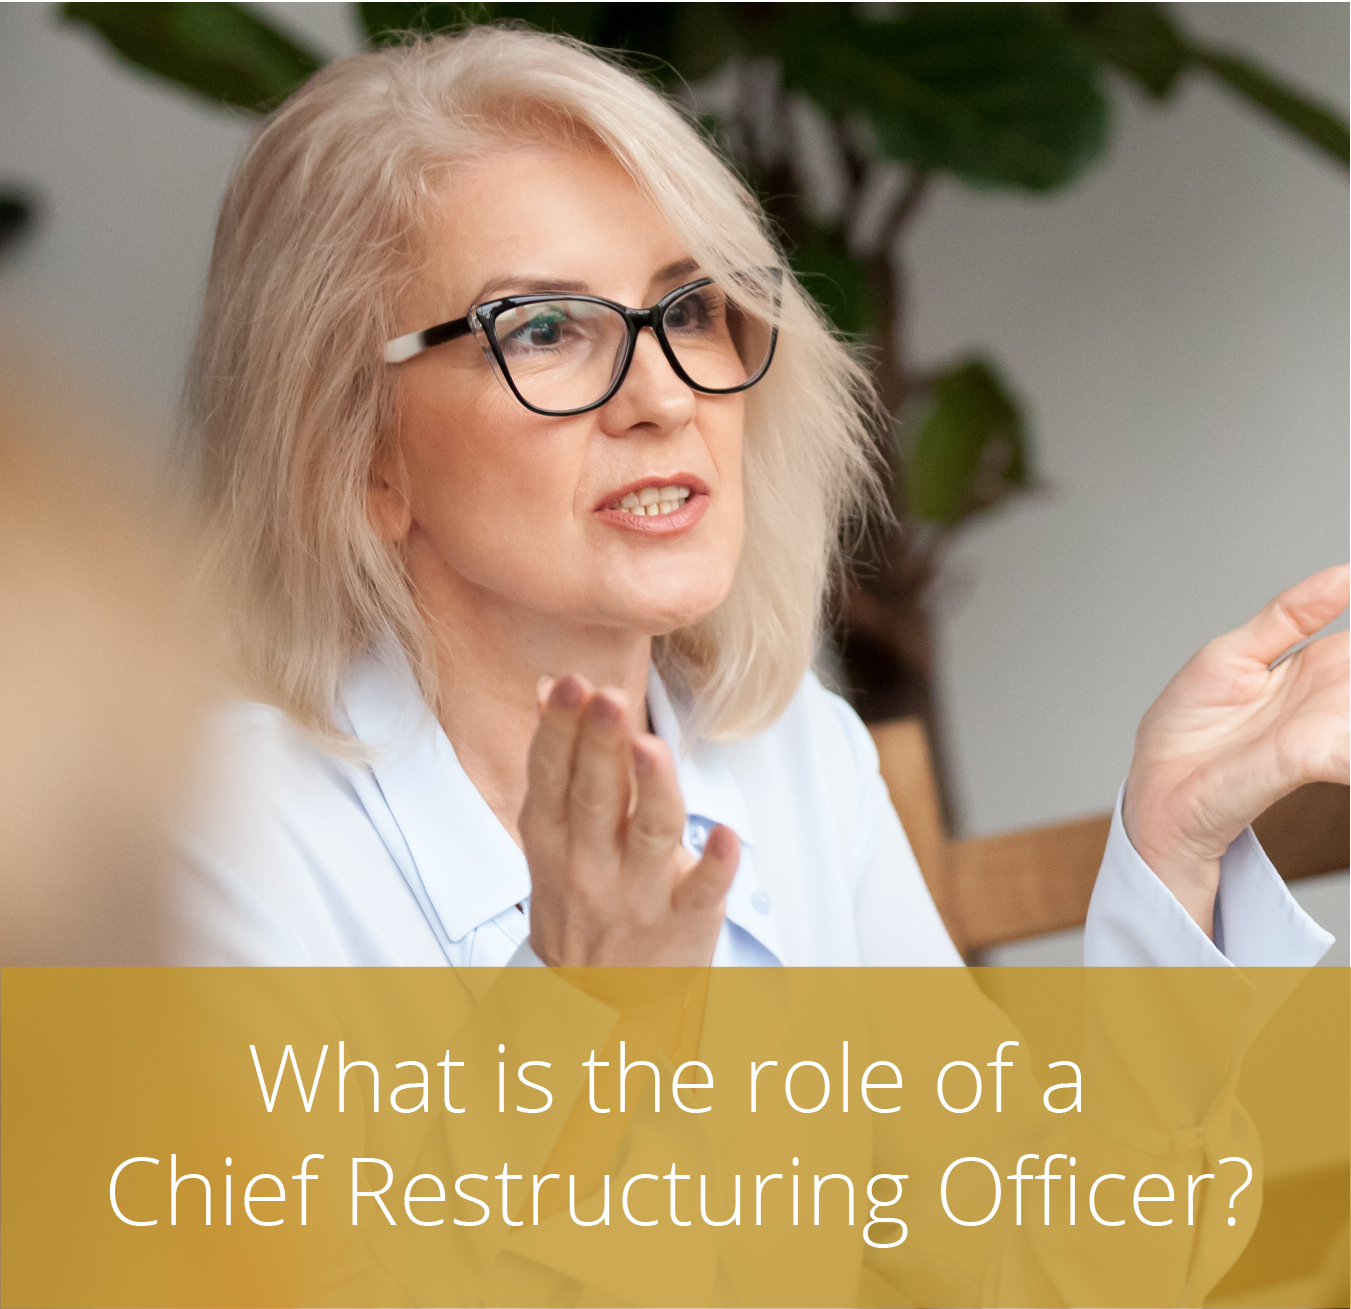 Thumbnail for What is the role of a Chief Restructuring Officer?